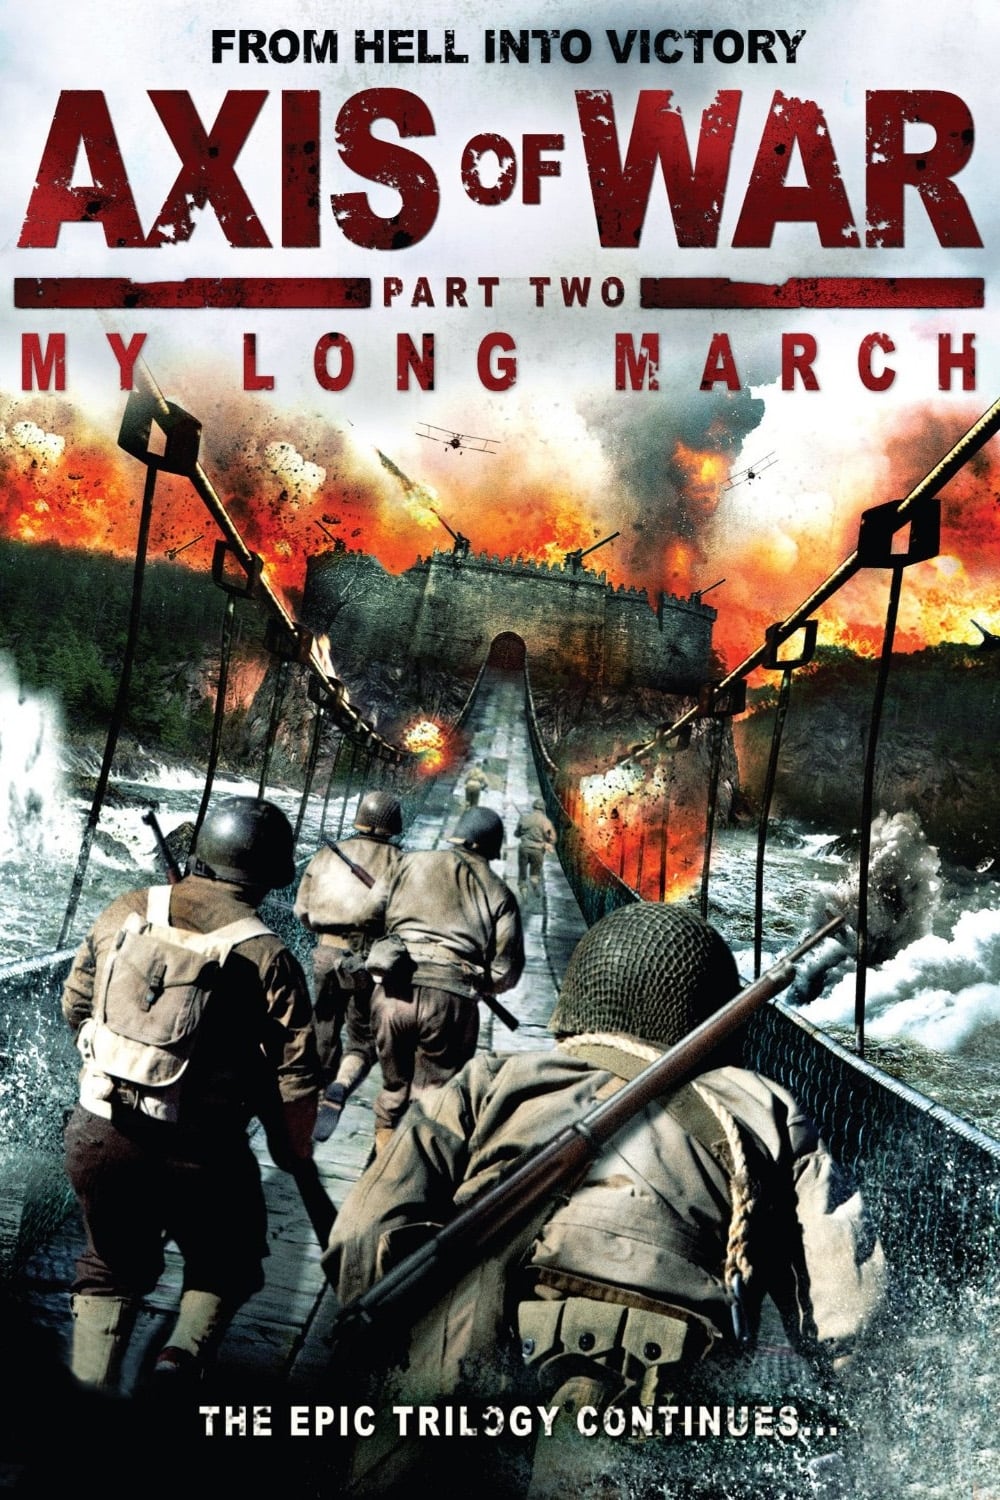 Axis of War: My Long March